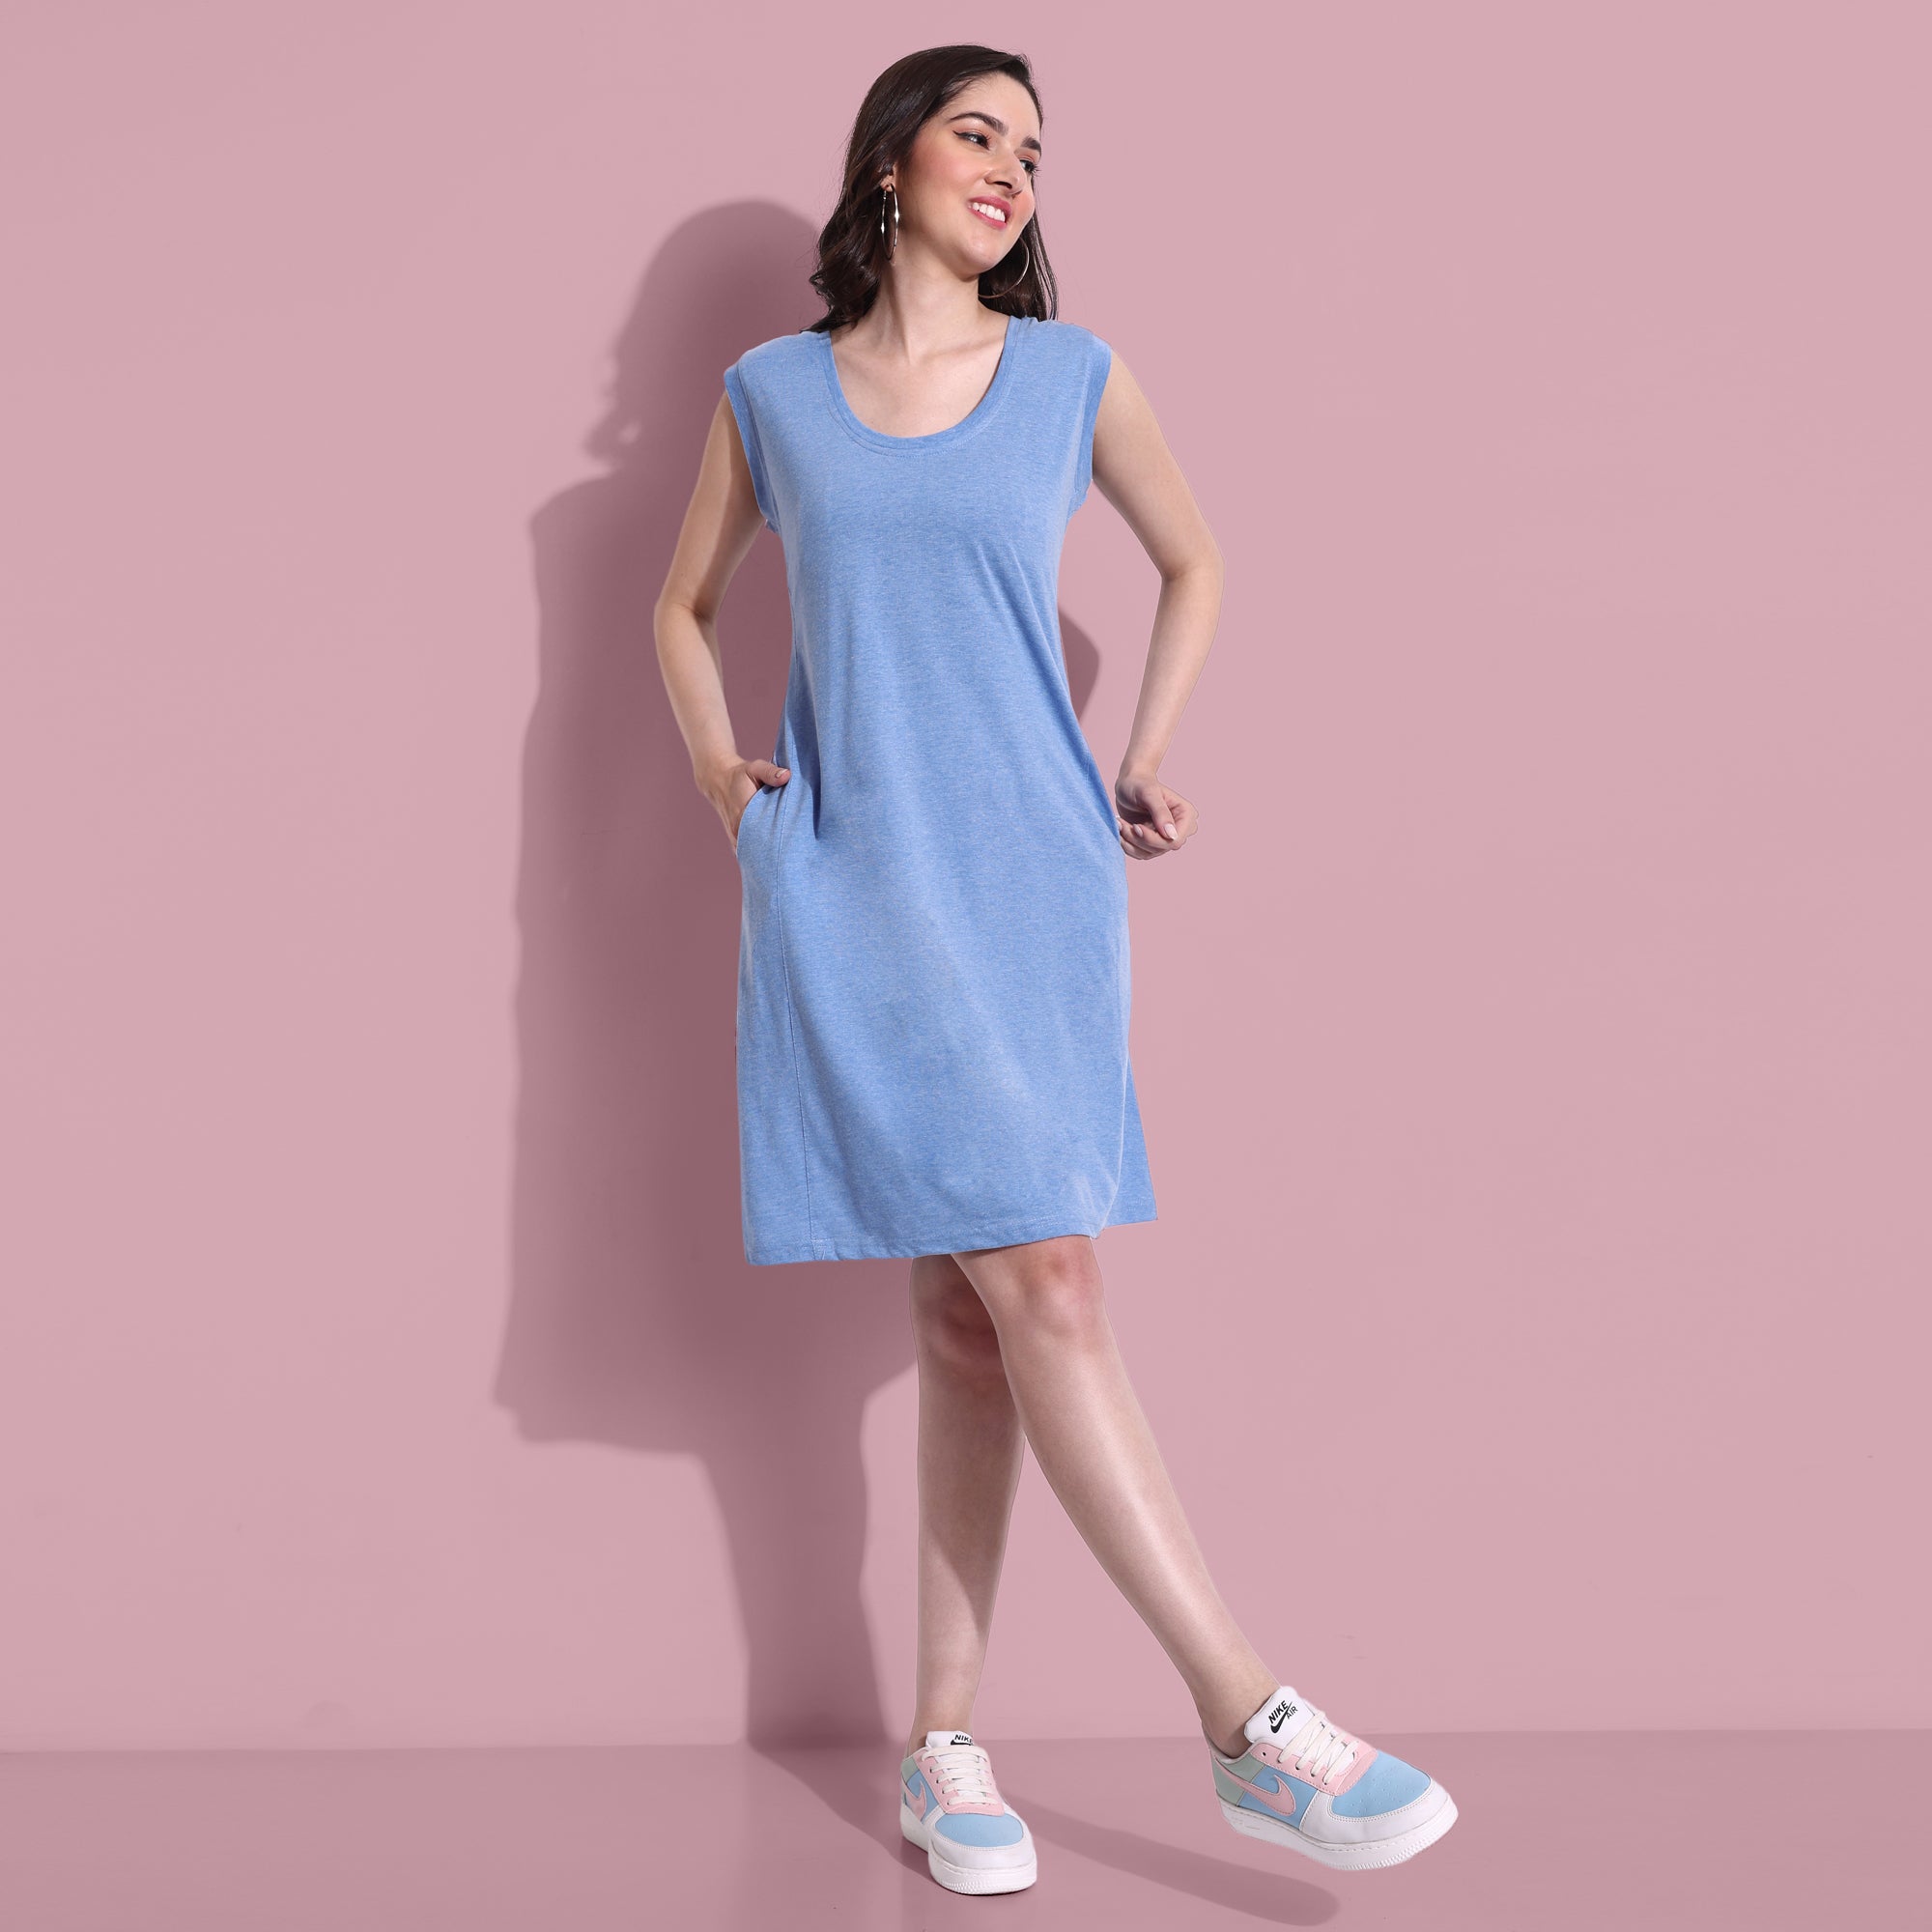 Shop Online Bodycon Dress Blue Sleeveless Denim Bodycon Dress Midi Dress  And Get Huge Discount on Your Online Shopping – Lady India